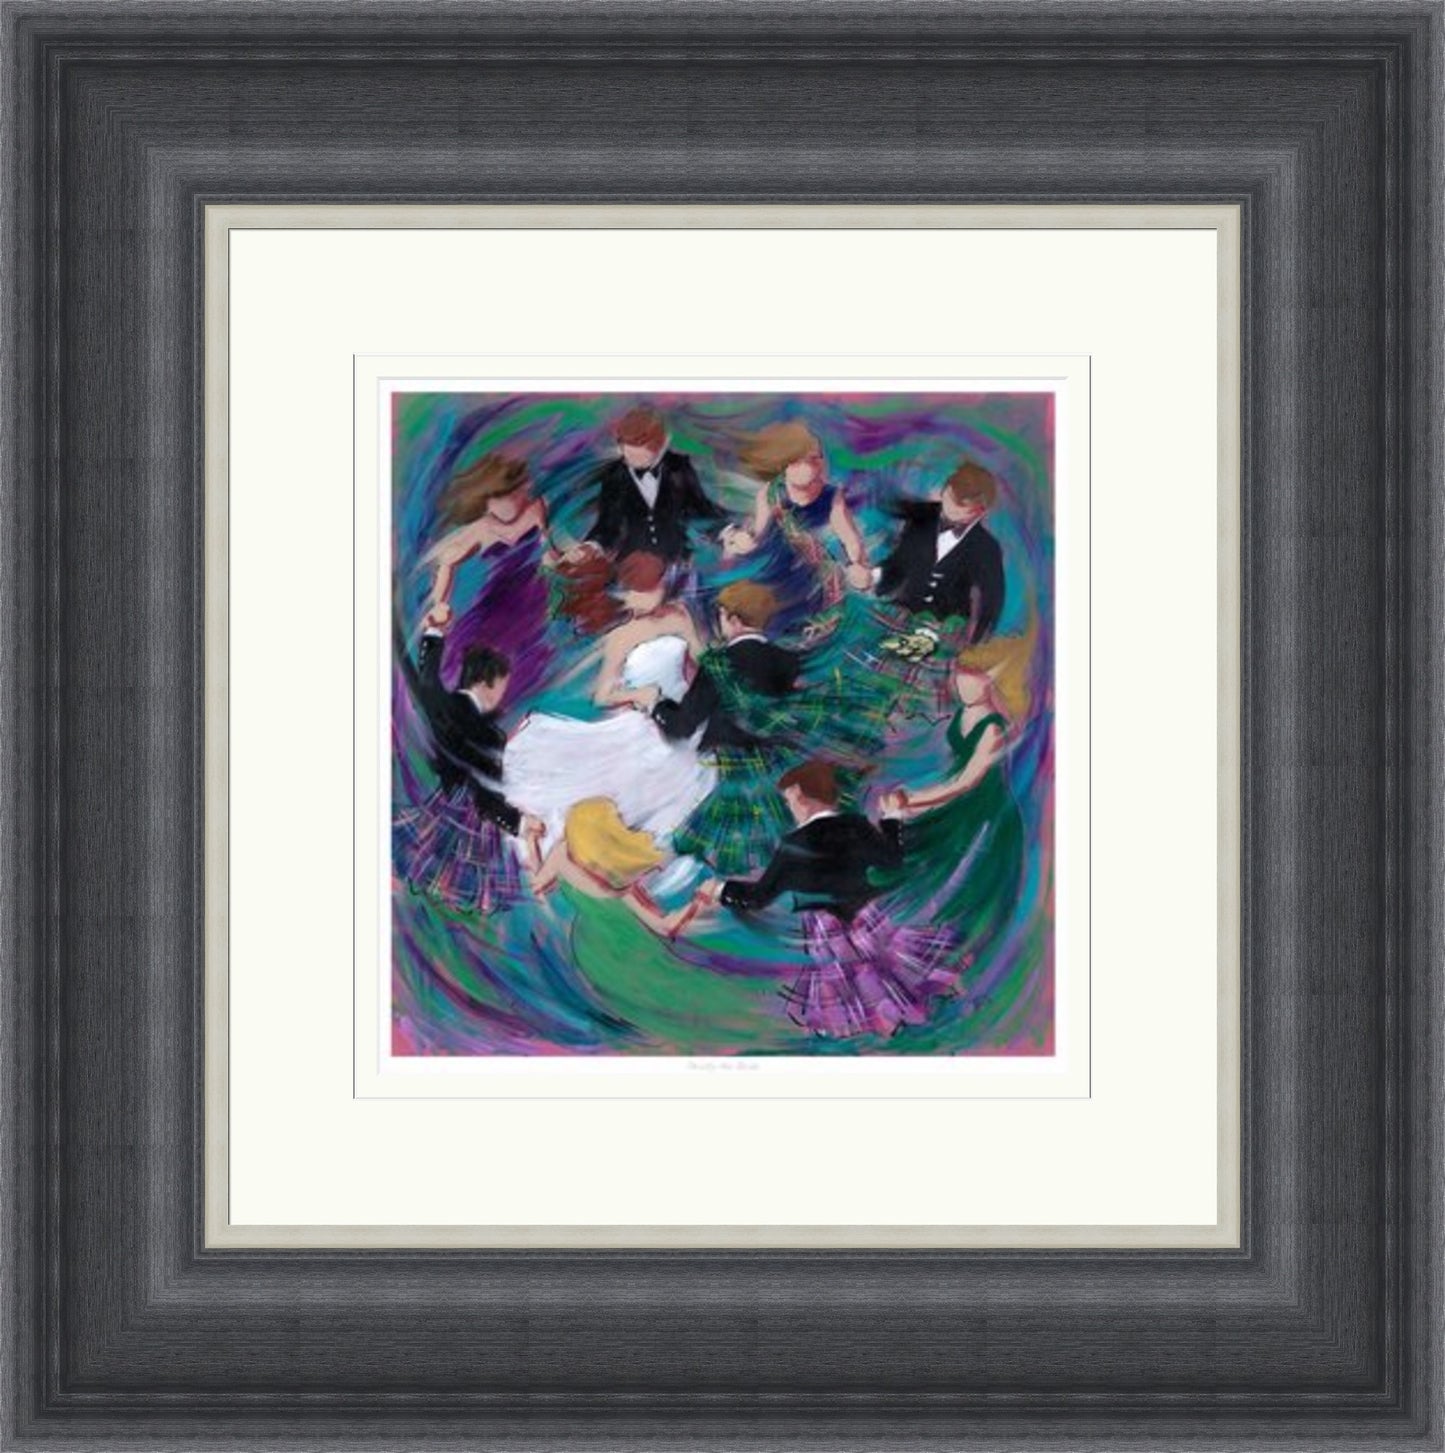 Strictly the Bride Ceilidh Dancing Art Print by Janet McCrorie